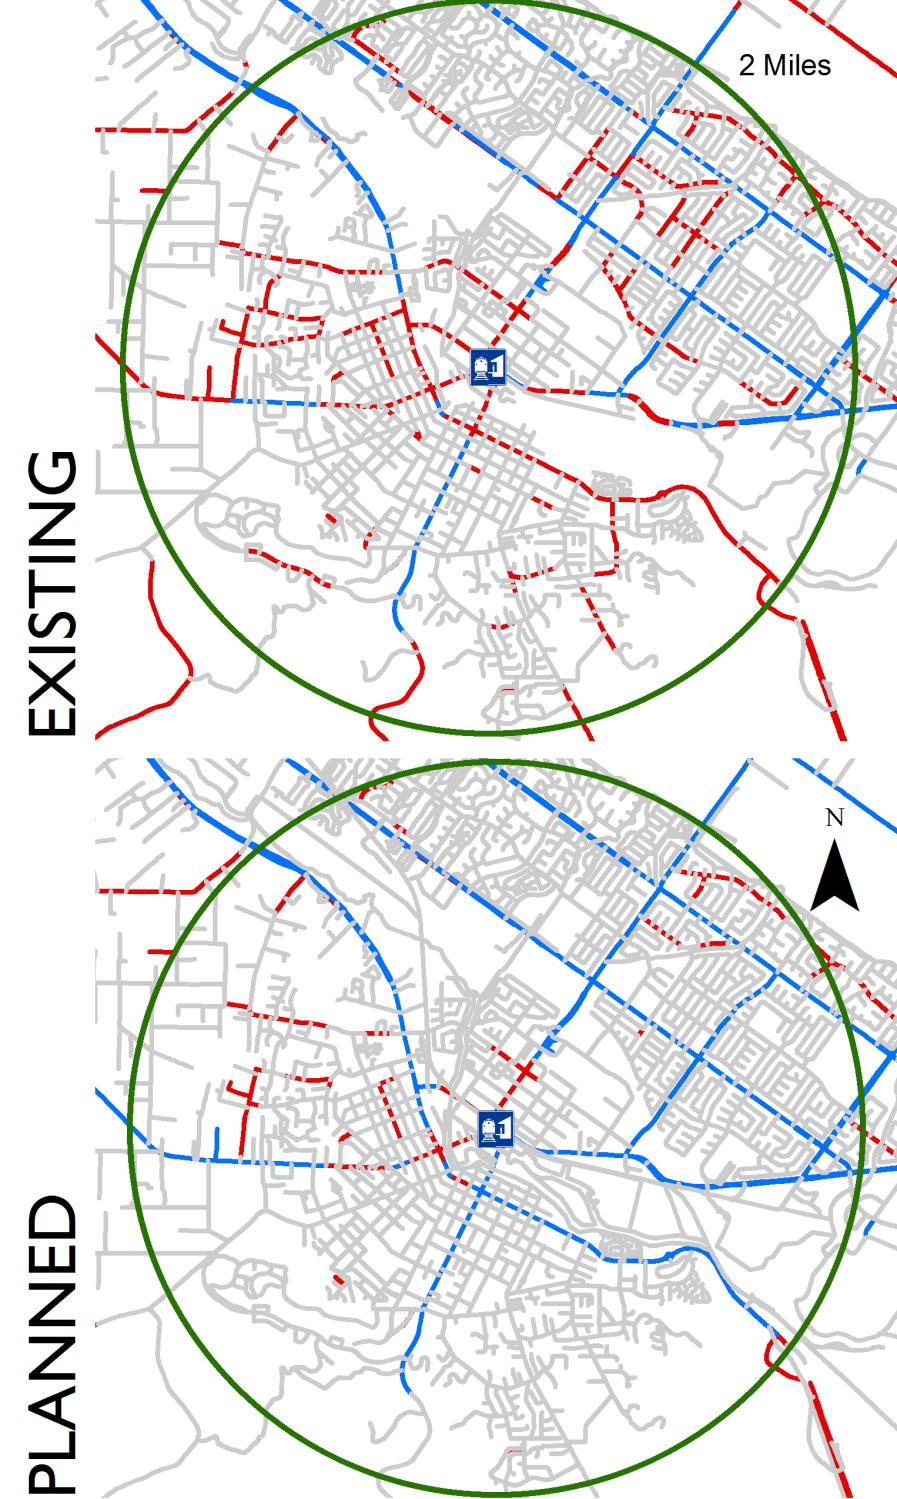 Bike Network Analysis the stress of a route is determined by its most stressful link,